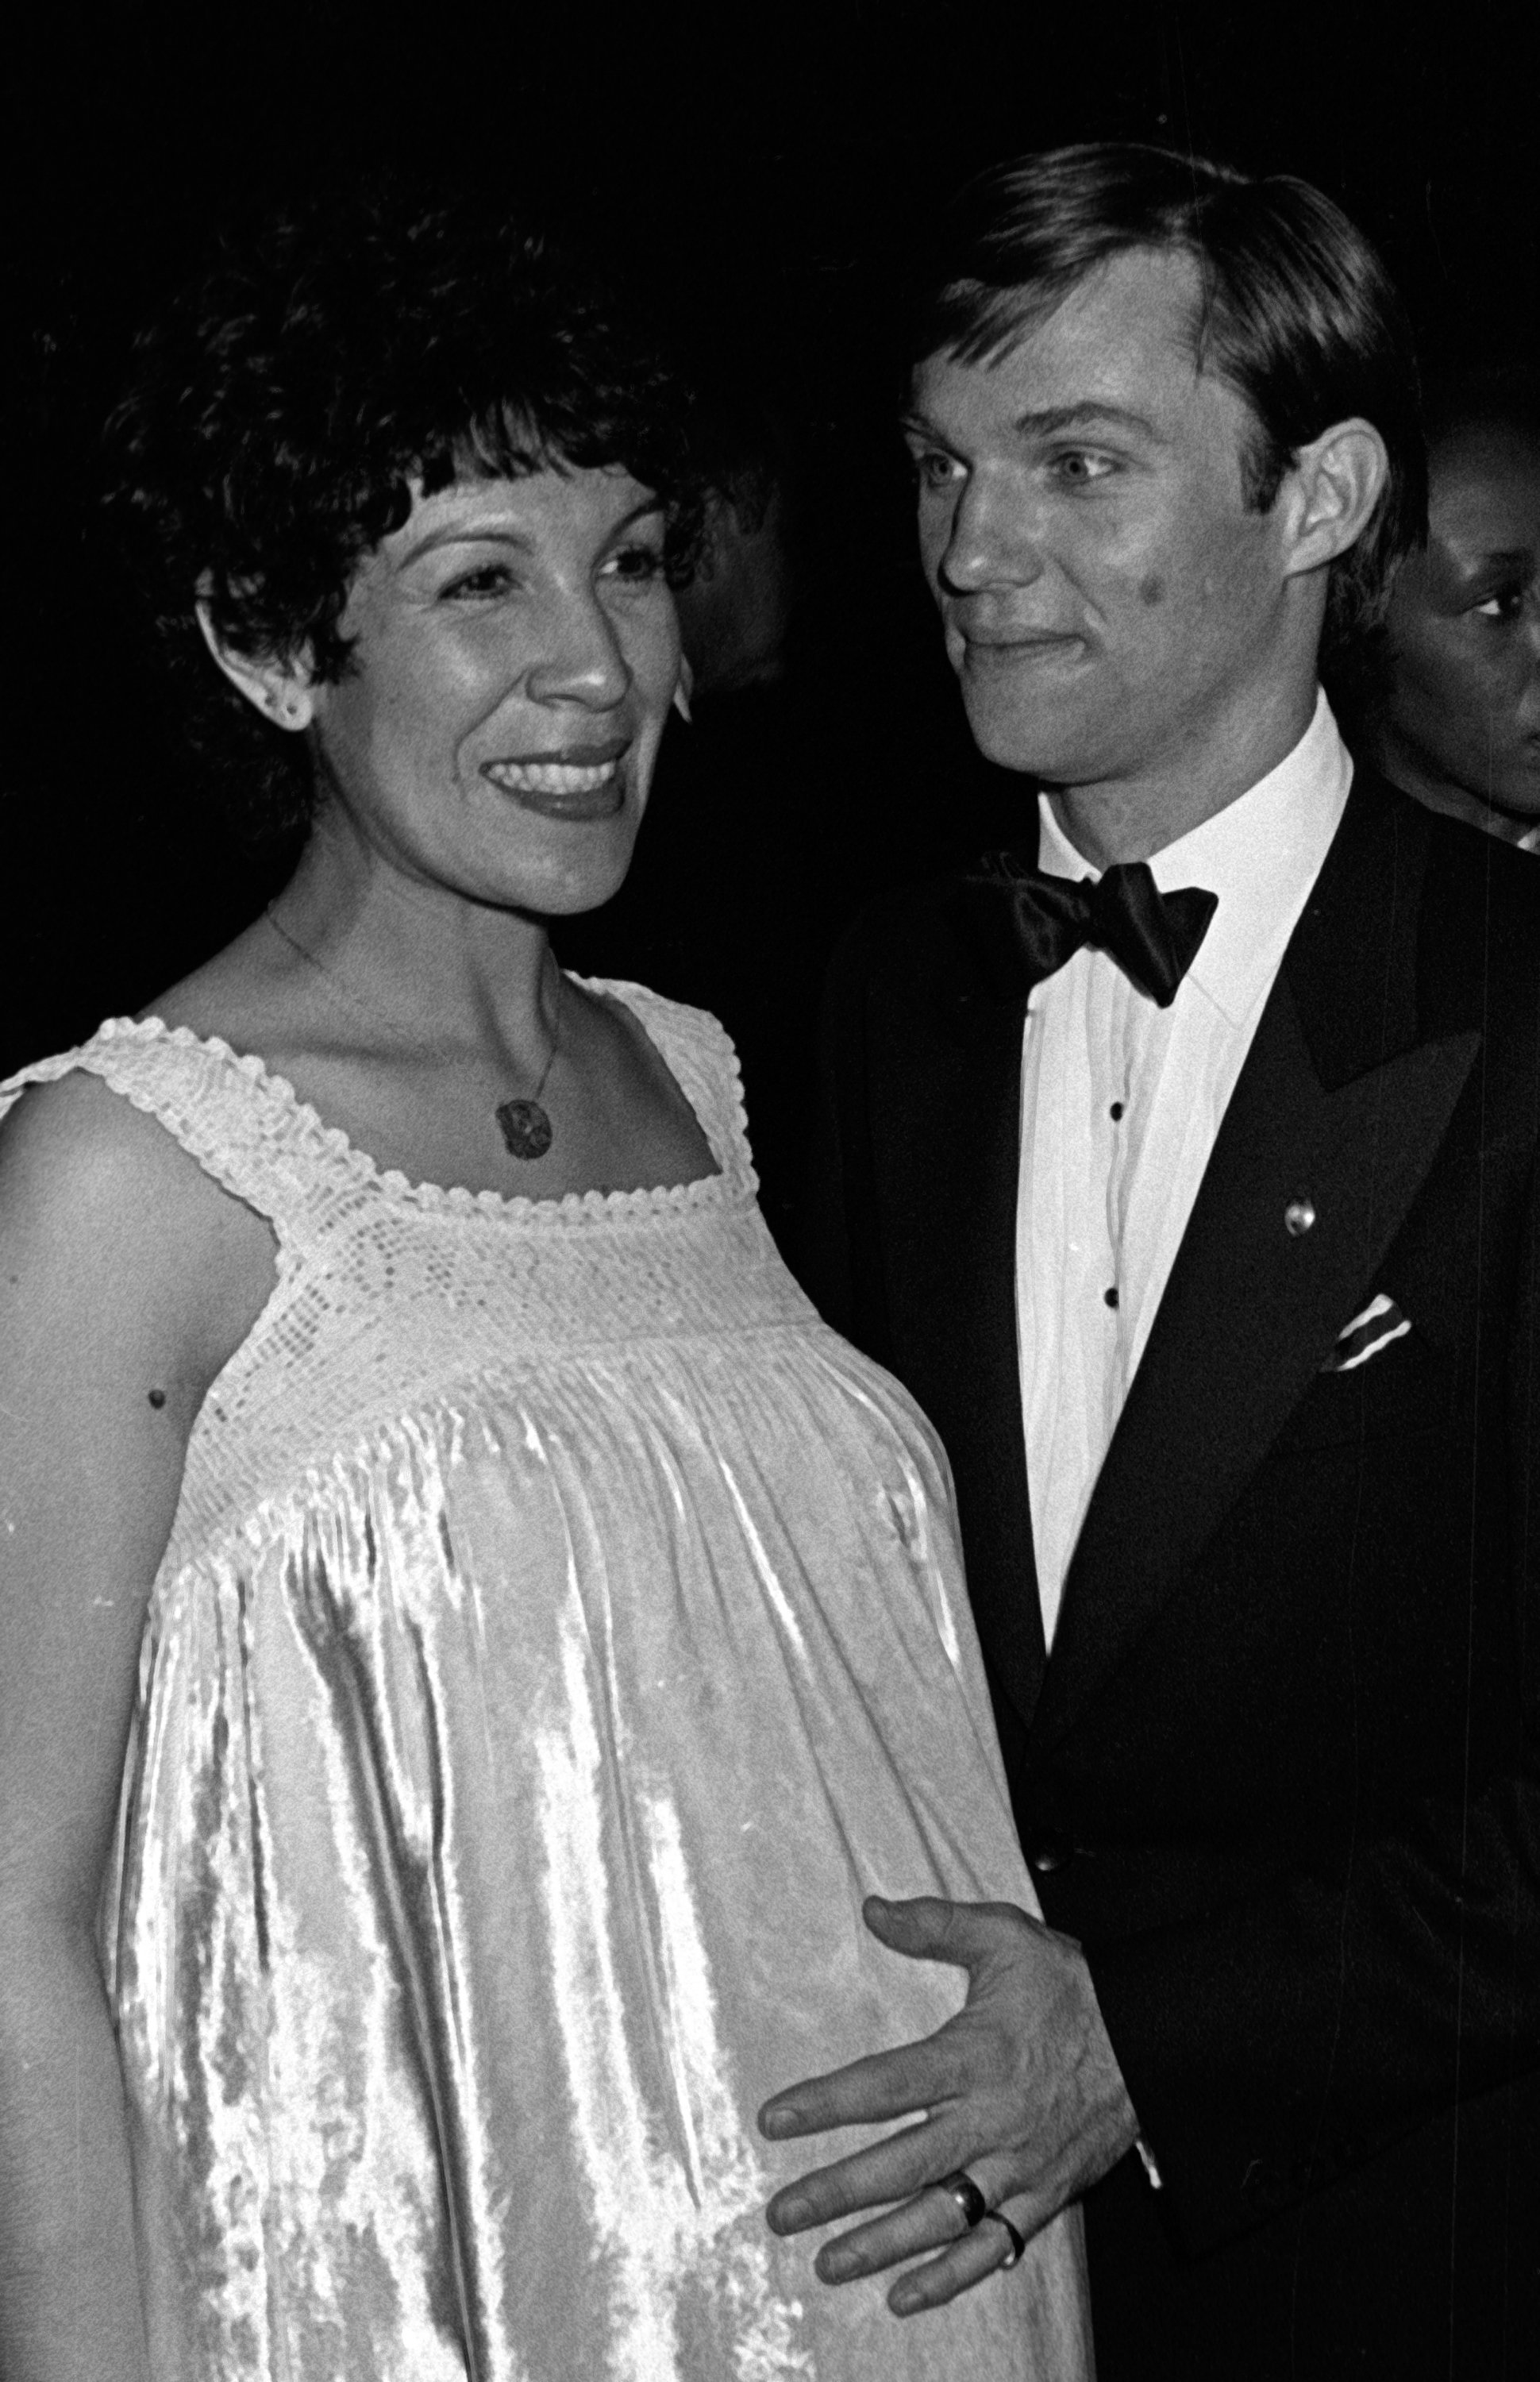 Richard Thomas and Alma Thomas at the 35th Annual Tony Awards on June 7, 1981 at the Mark Hellinger Theater in New York City. | Source: Getty Image